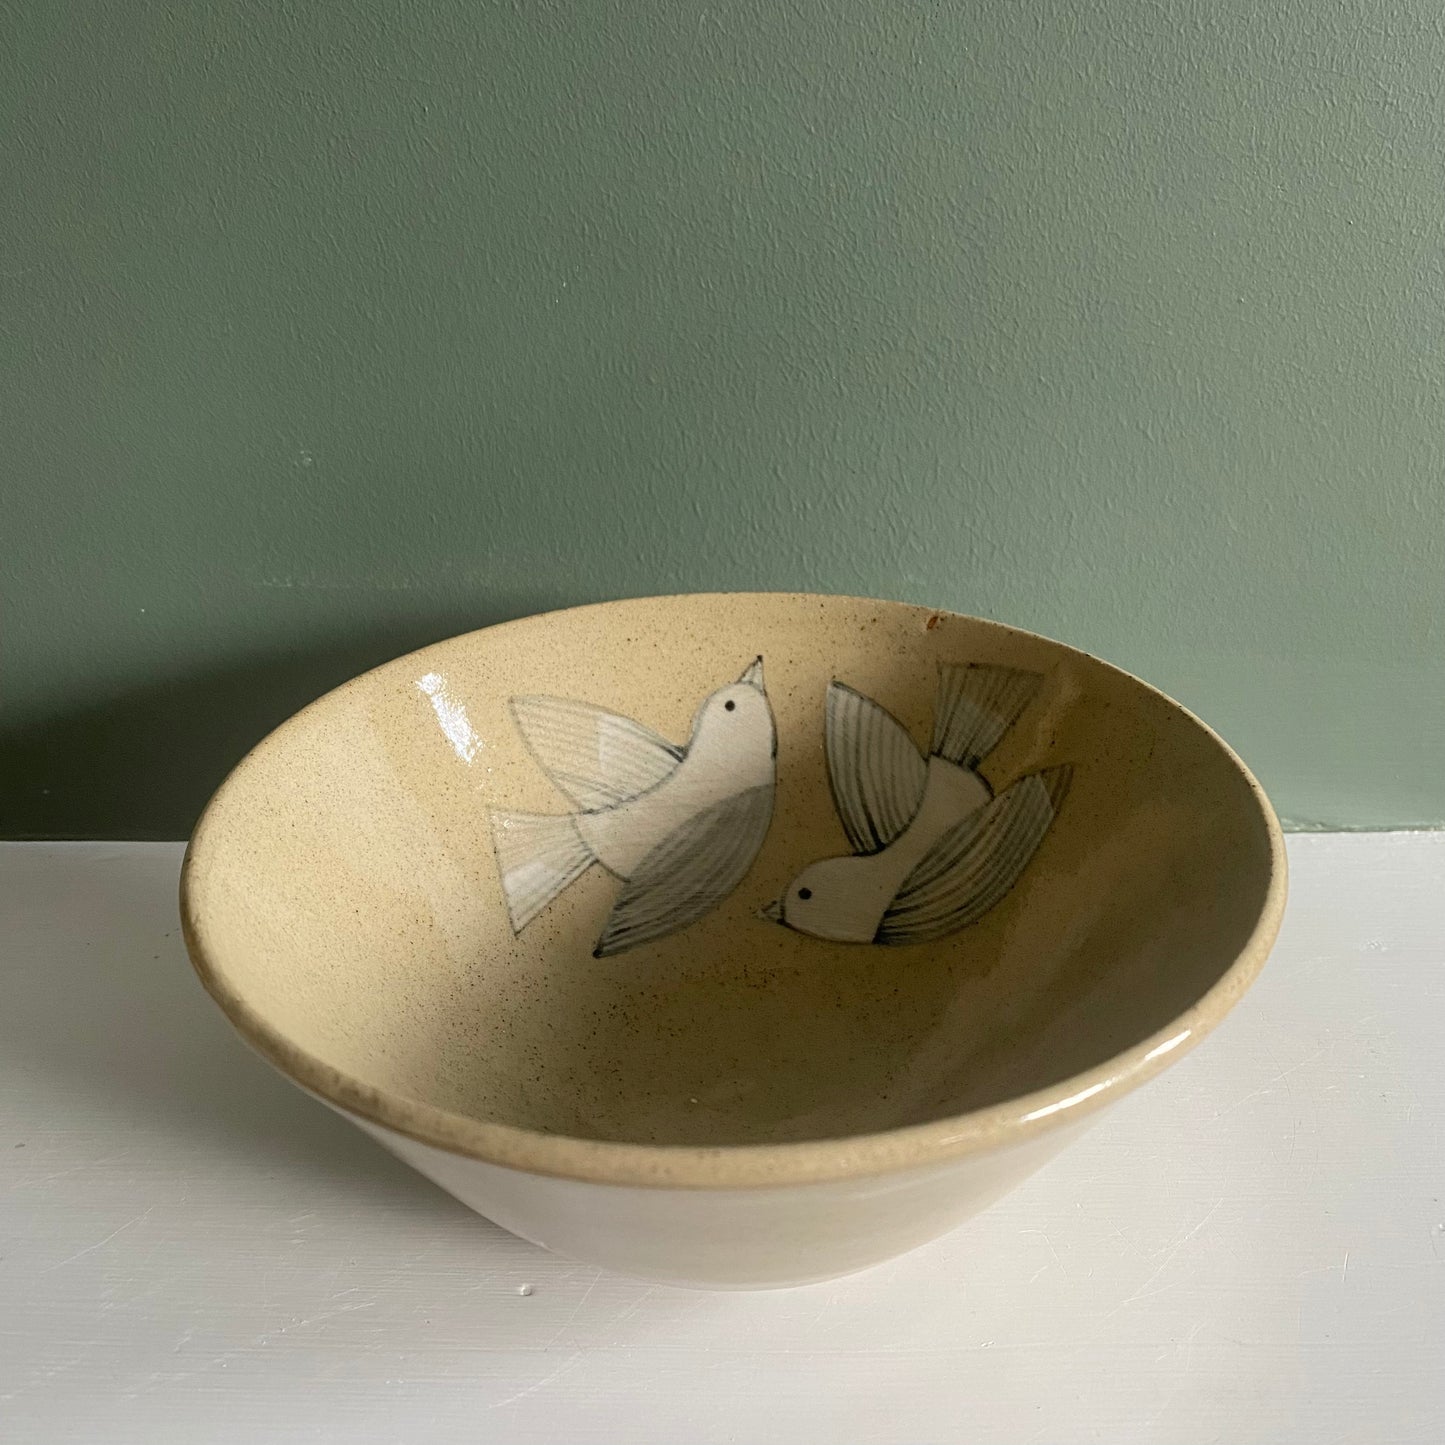 Two Birds 3, ceramic hand painted bowl, black and white, speckled clay